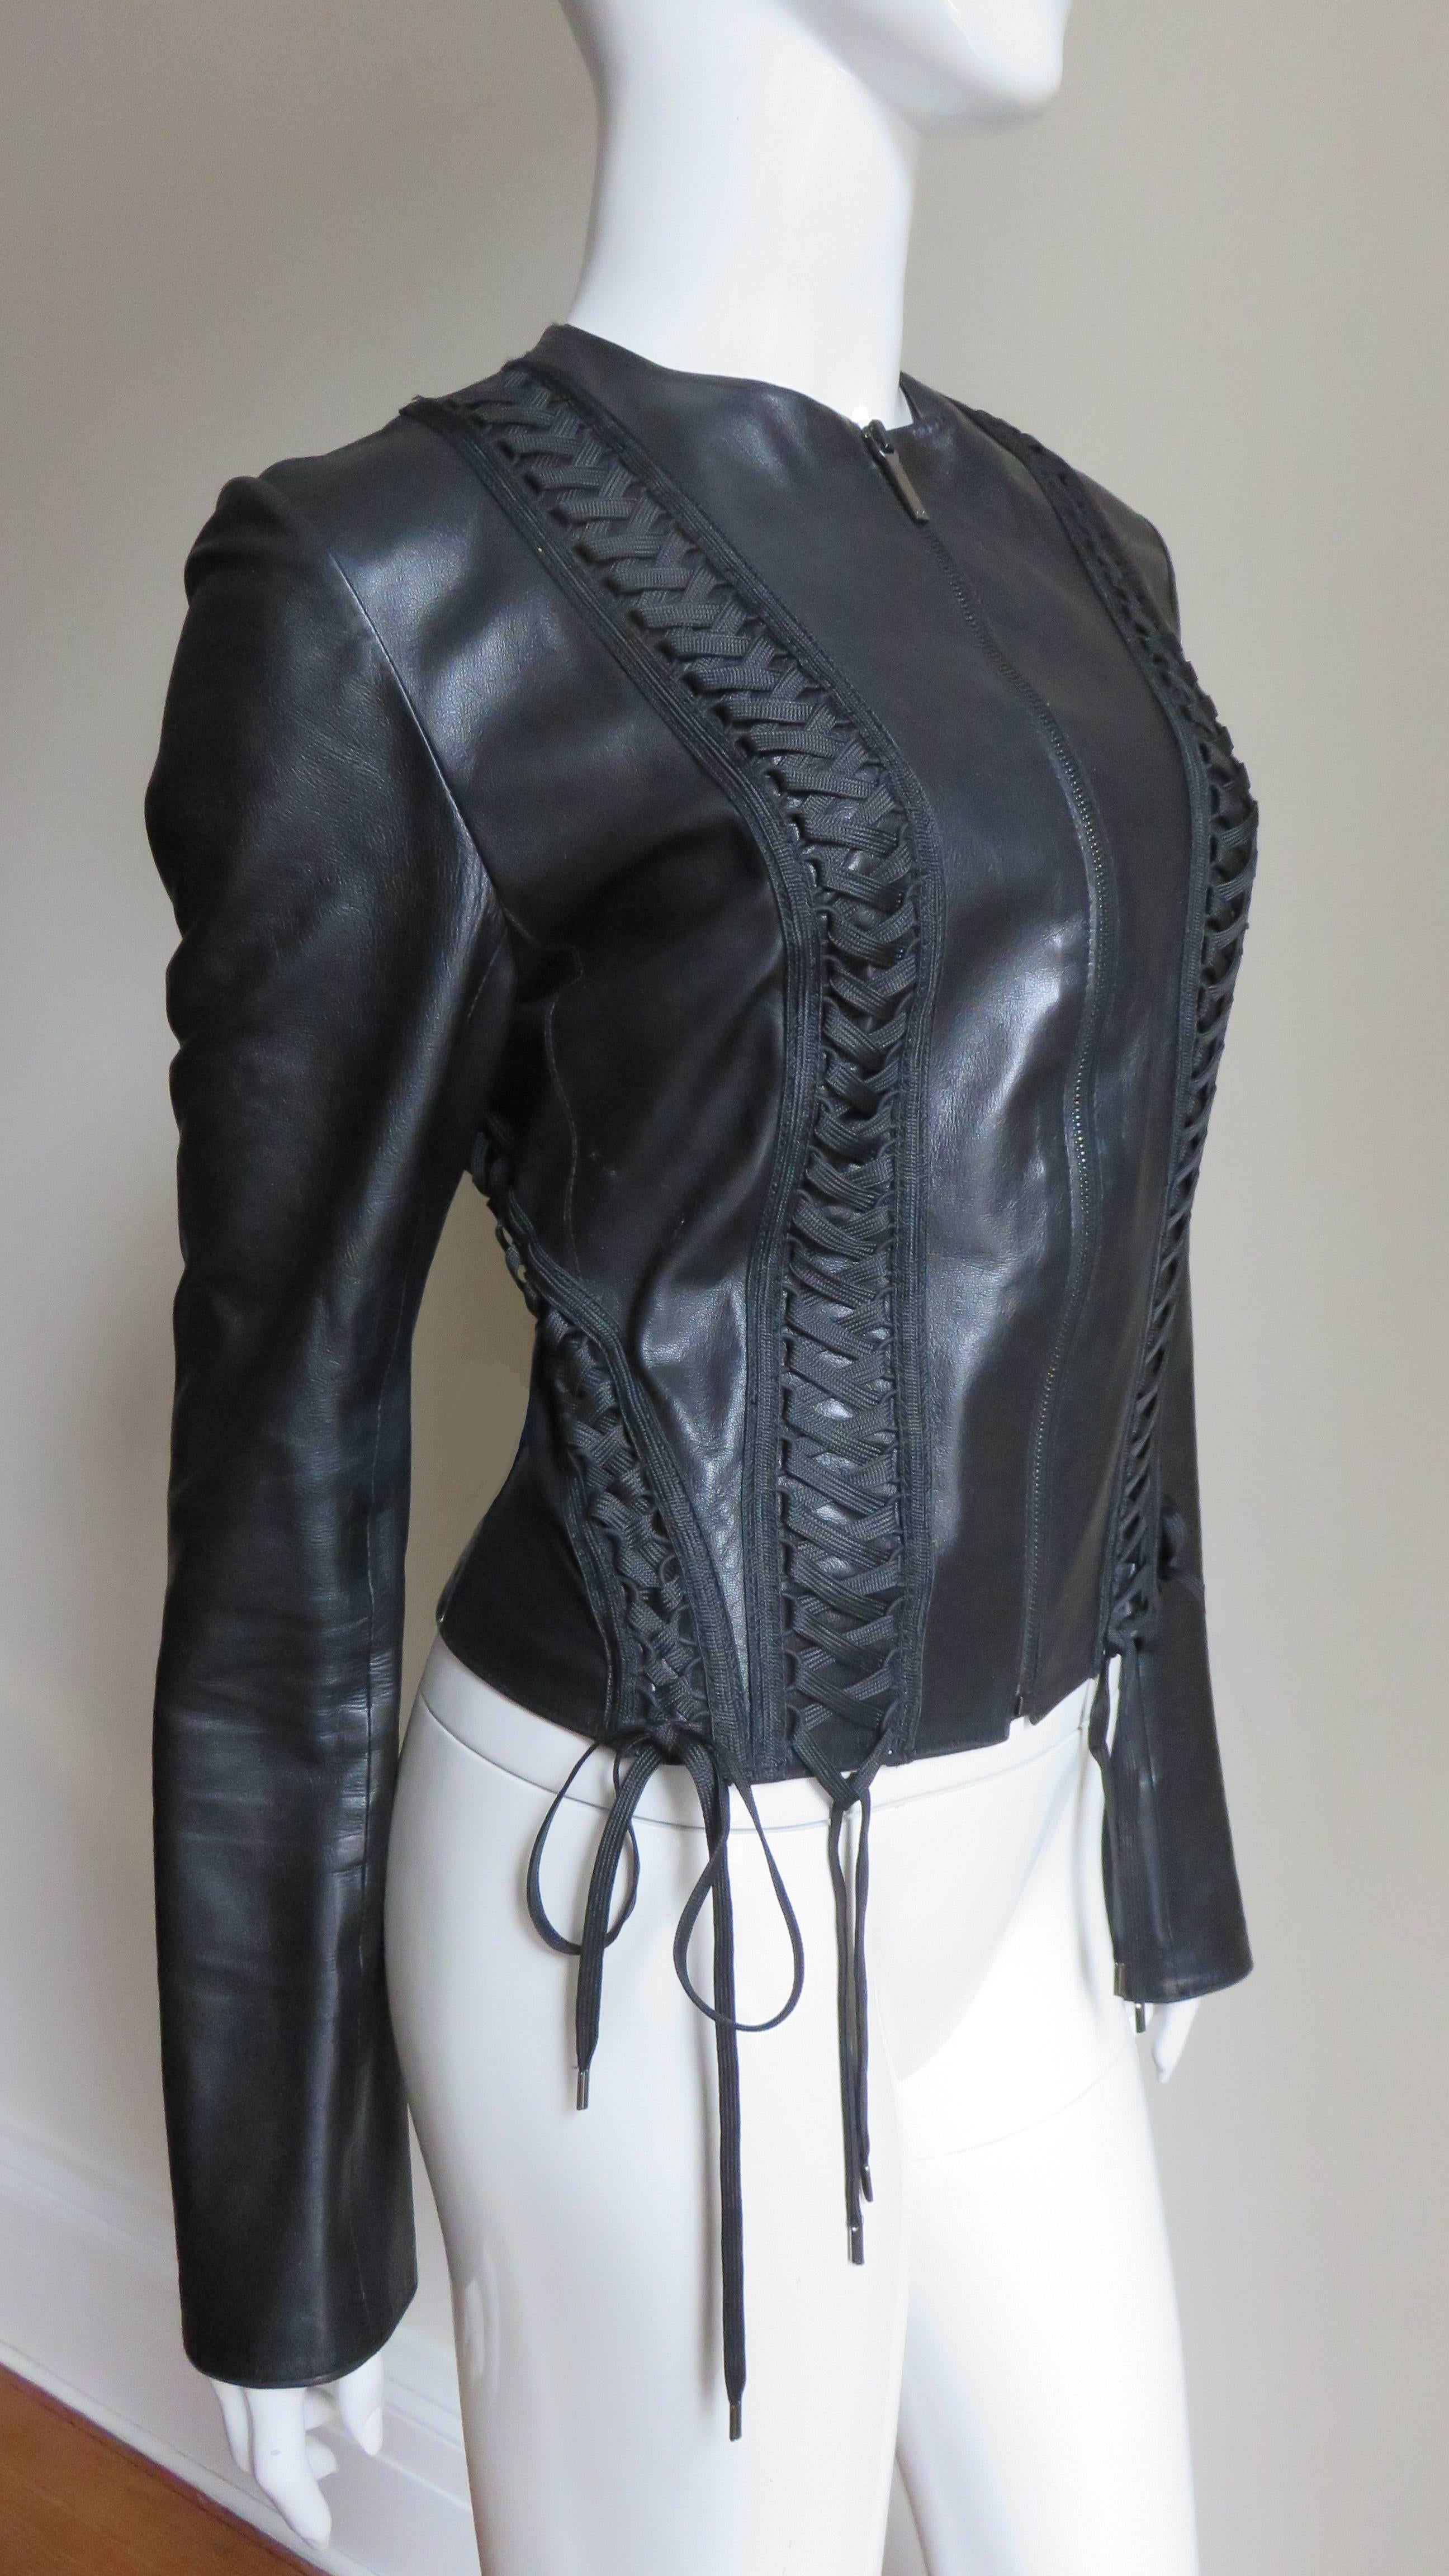 Christian Dior by John Galliano Lace-up Leather Jacket S/S 2002 In Good Condition For Sale In Water Mill, NY